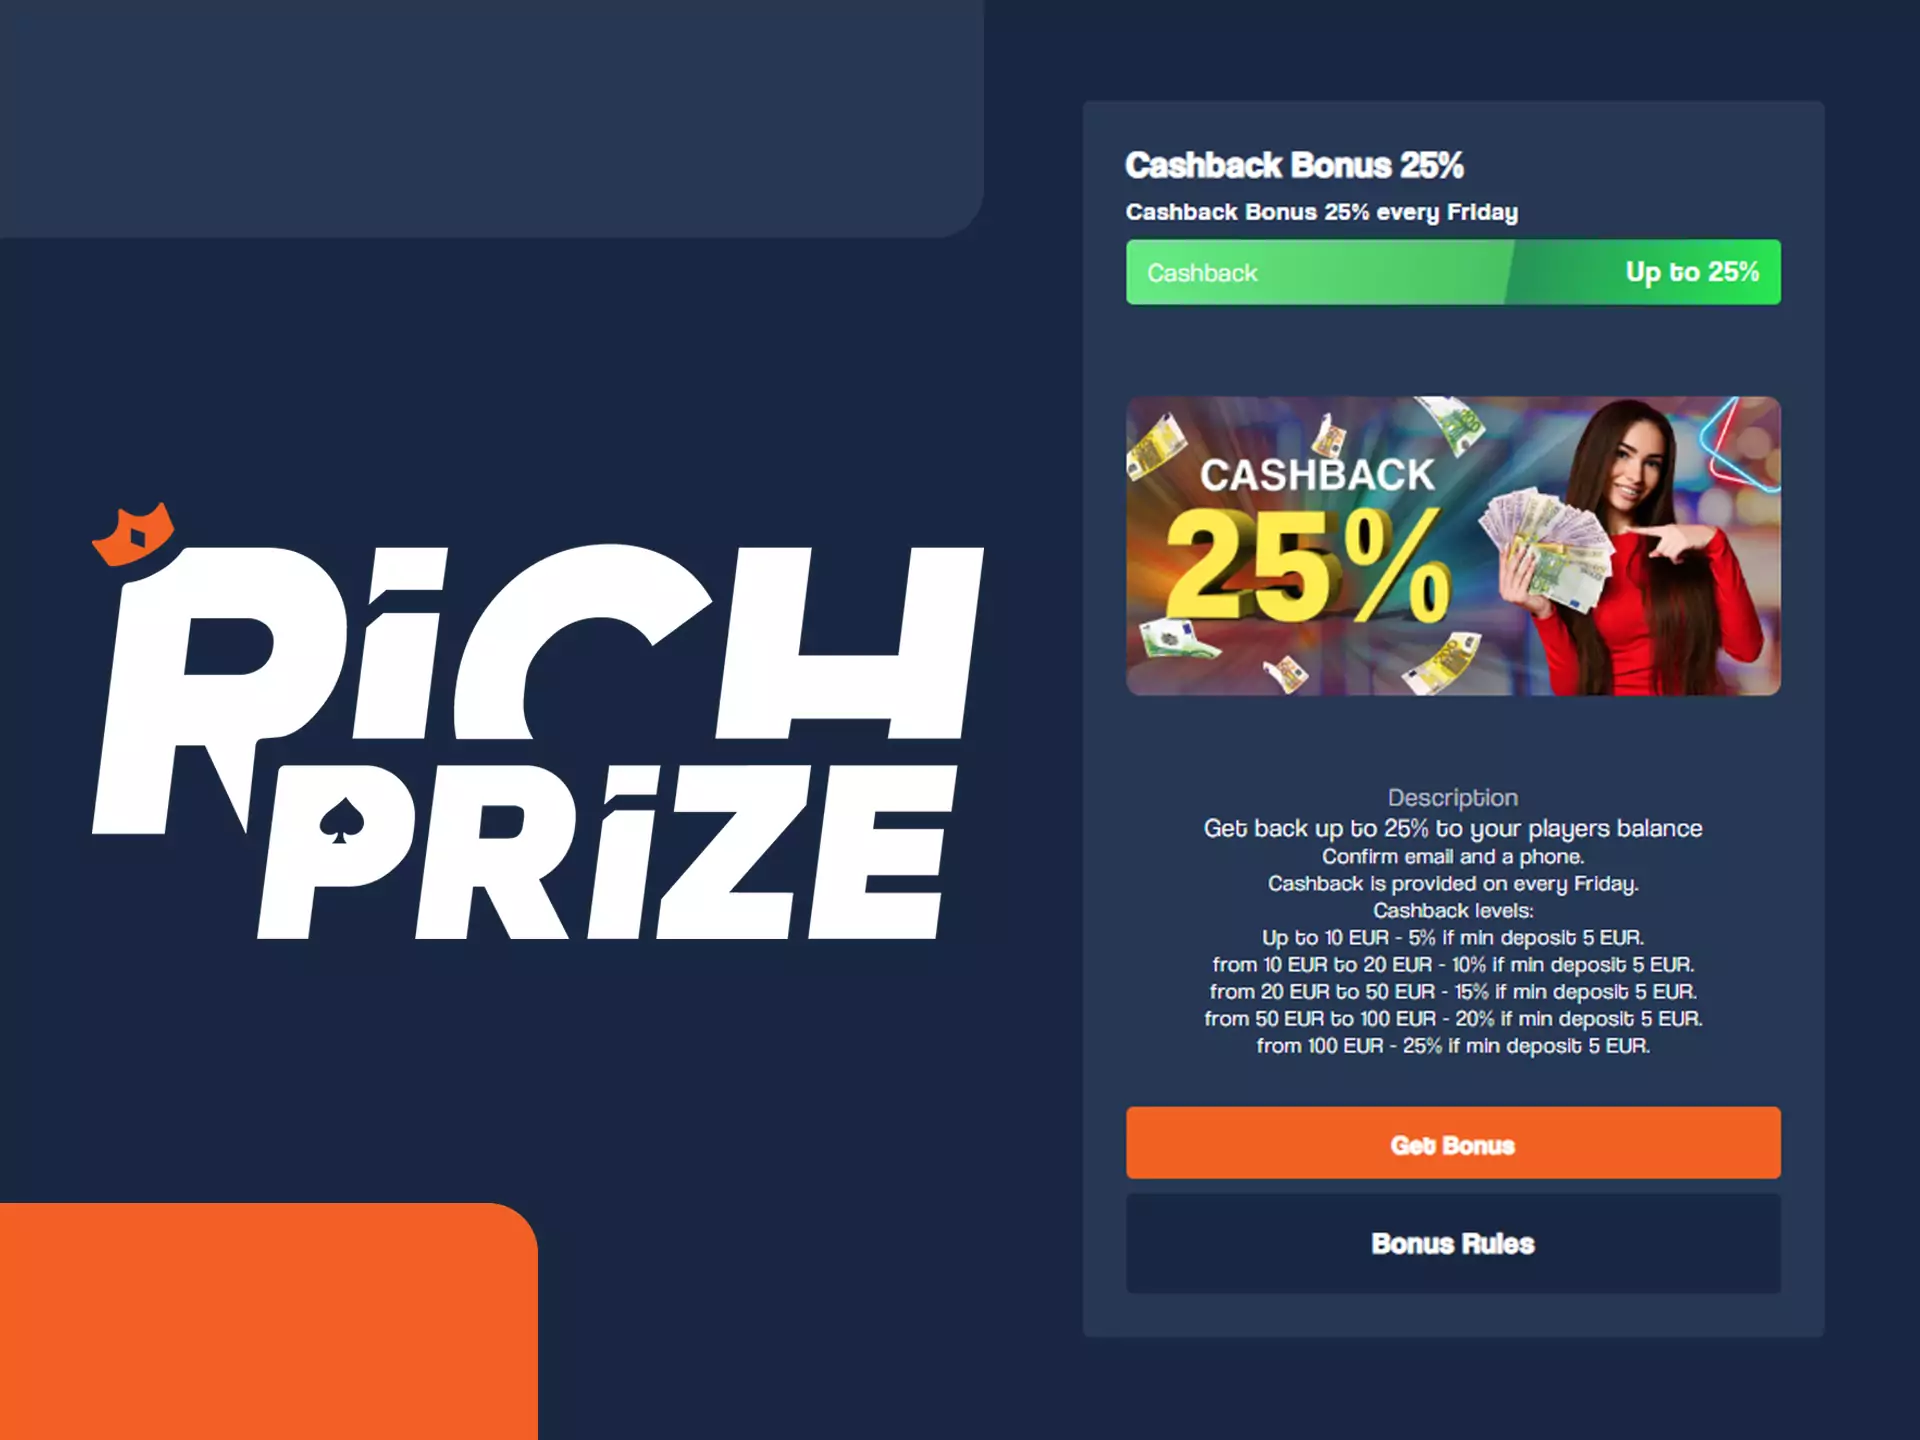 Earch cashback money after each of your deposit in Richprize app.